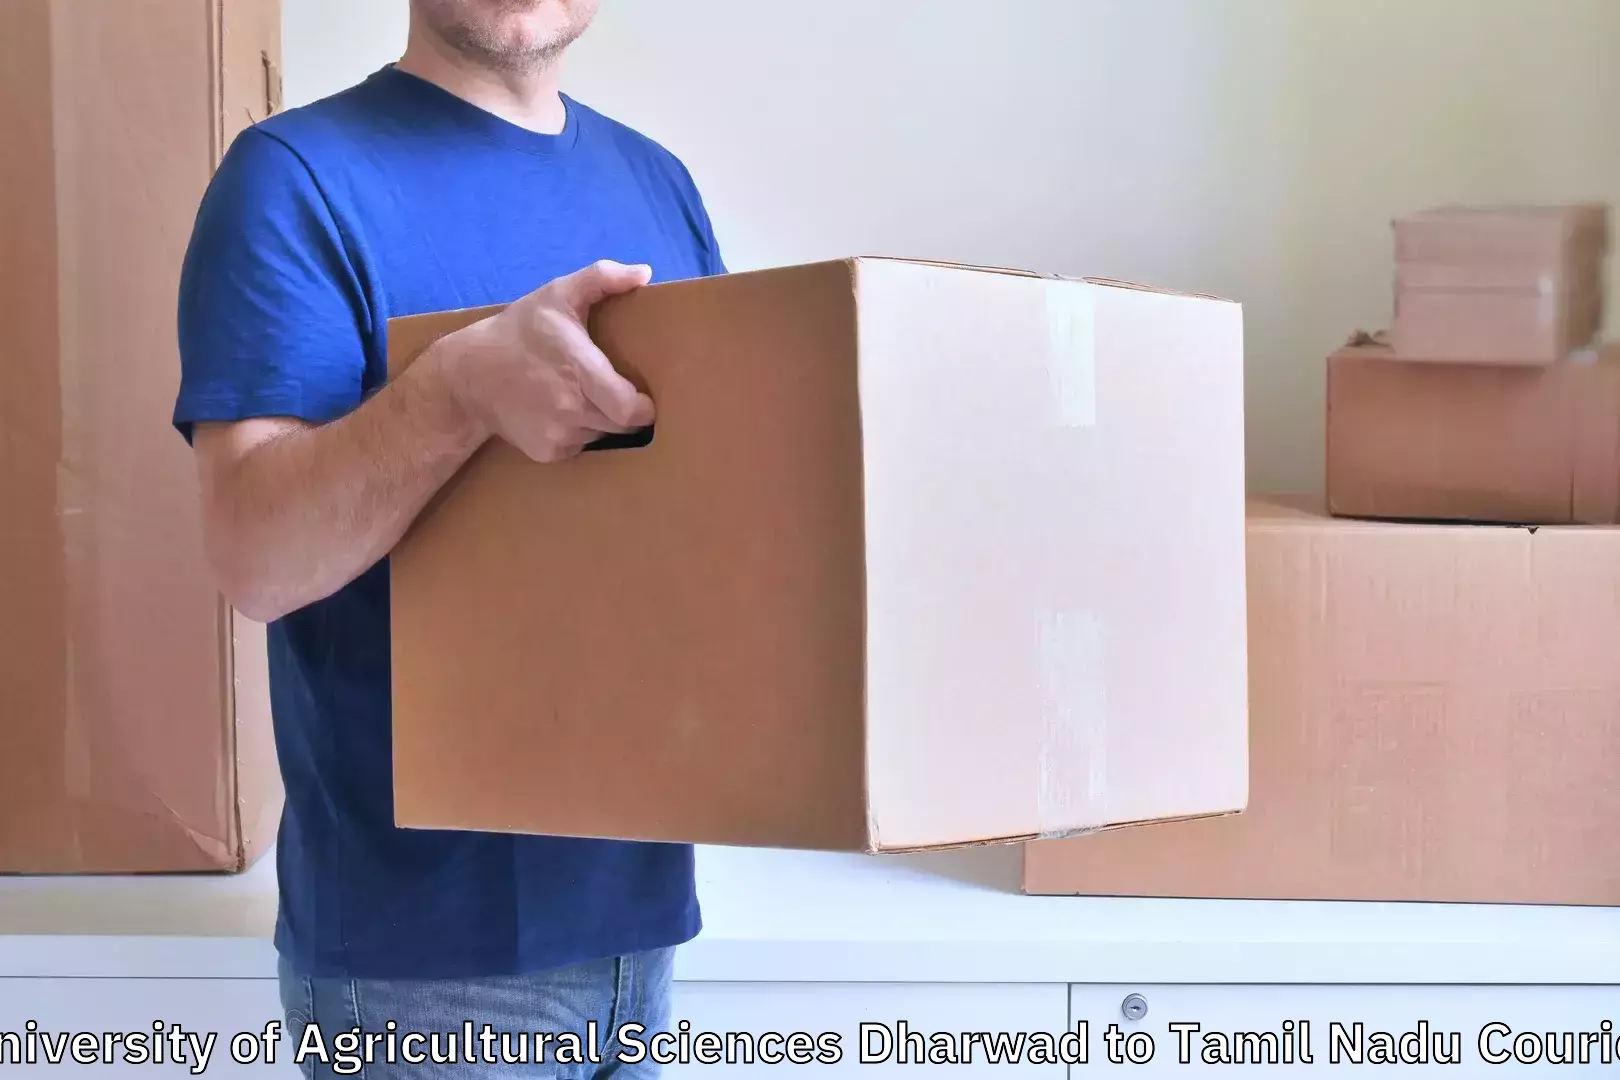 Instant baggage transport quote University of Agricultural Sciences Dharwad to Chennai Port